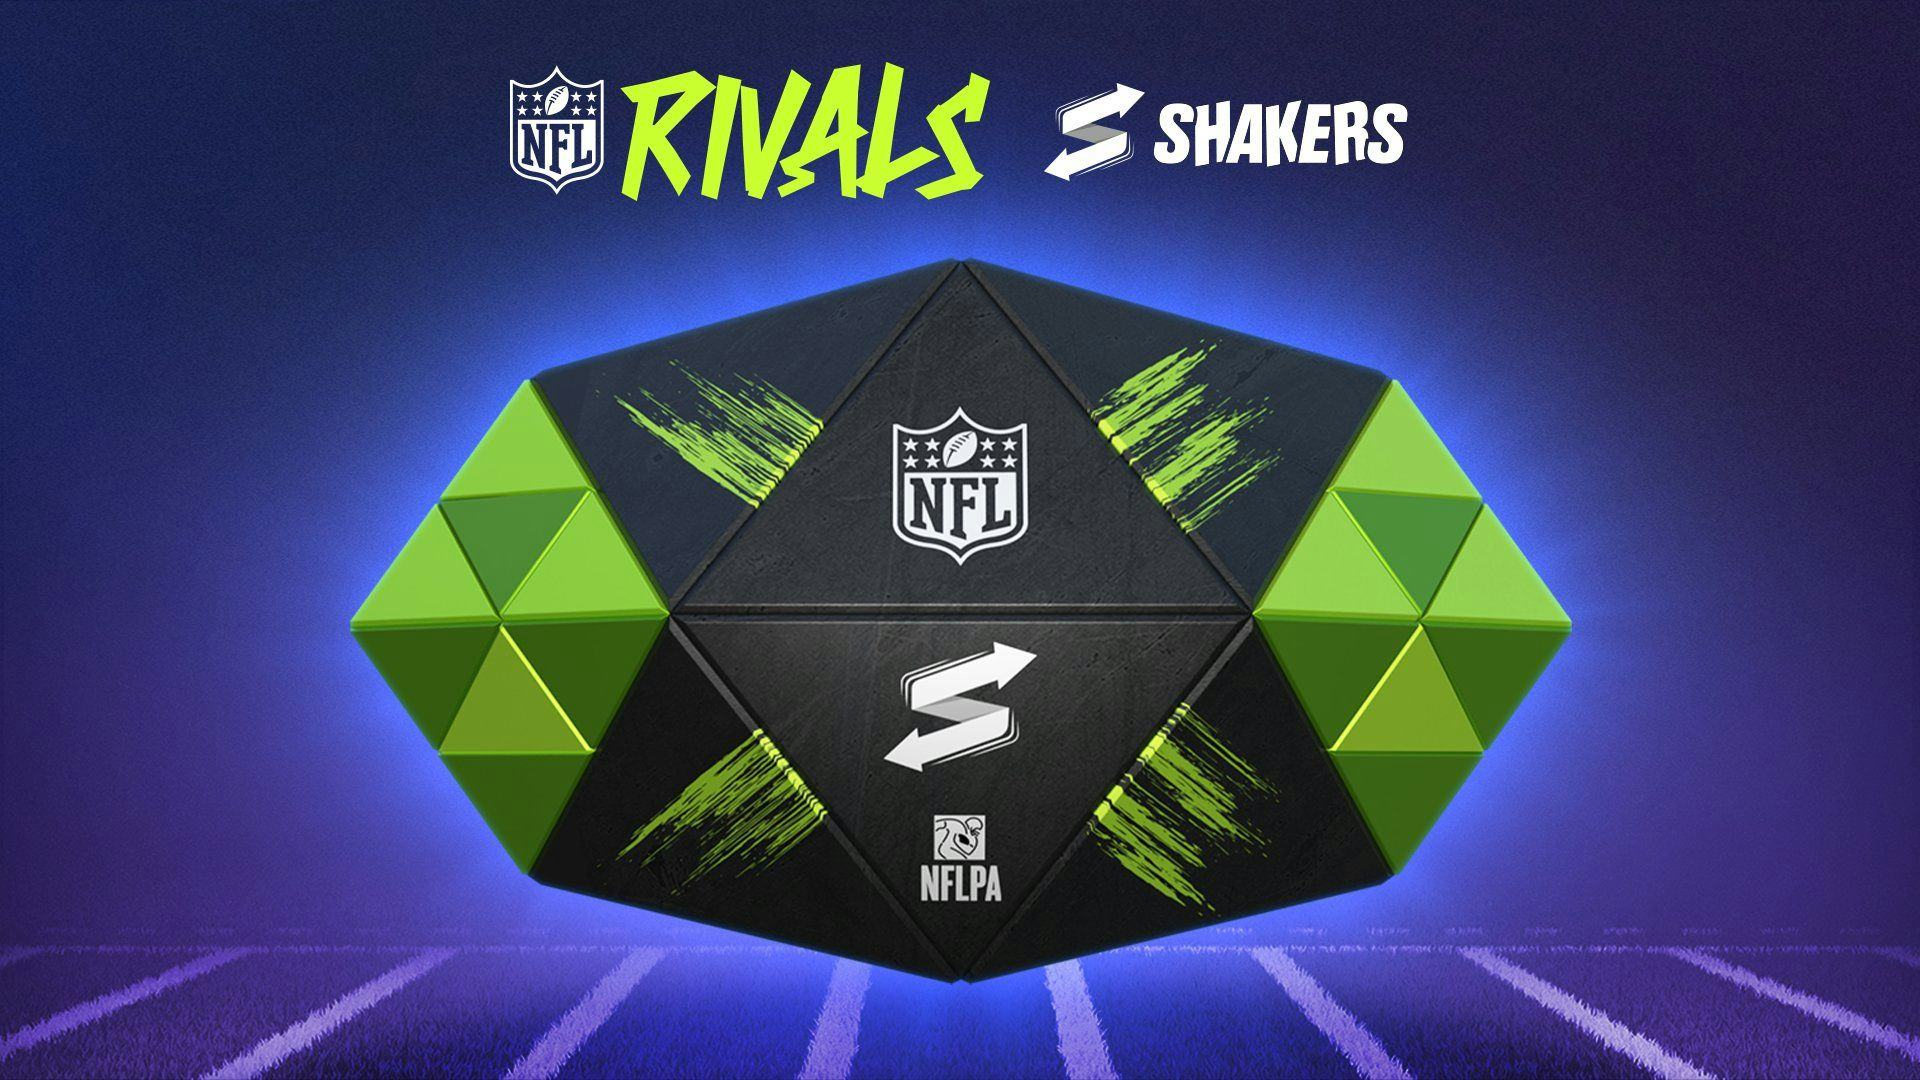 NFL Rivals Shakes Up with Shakers Program - Free Agents and More